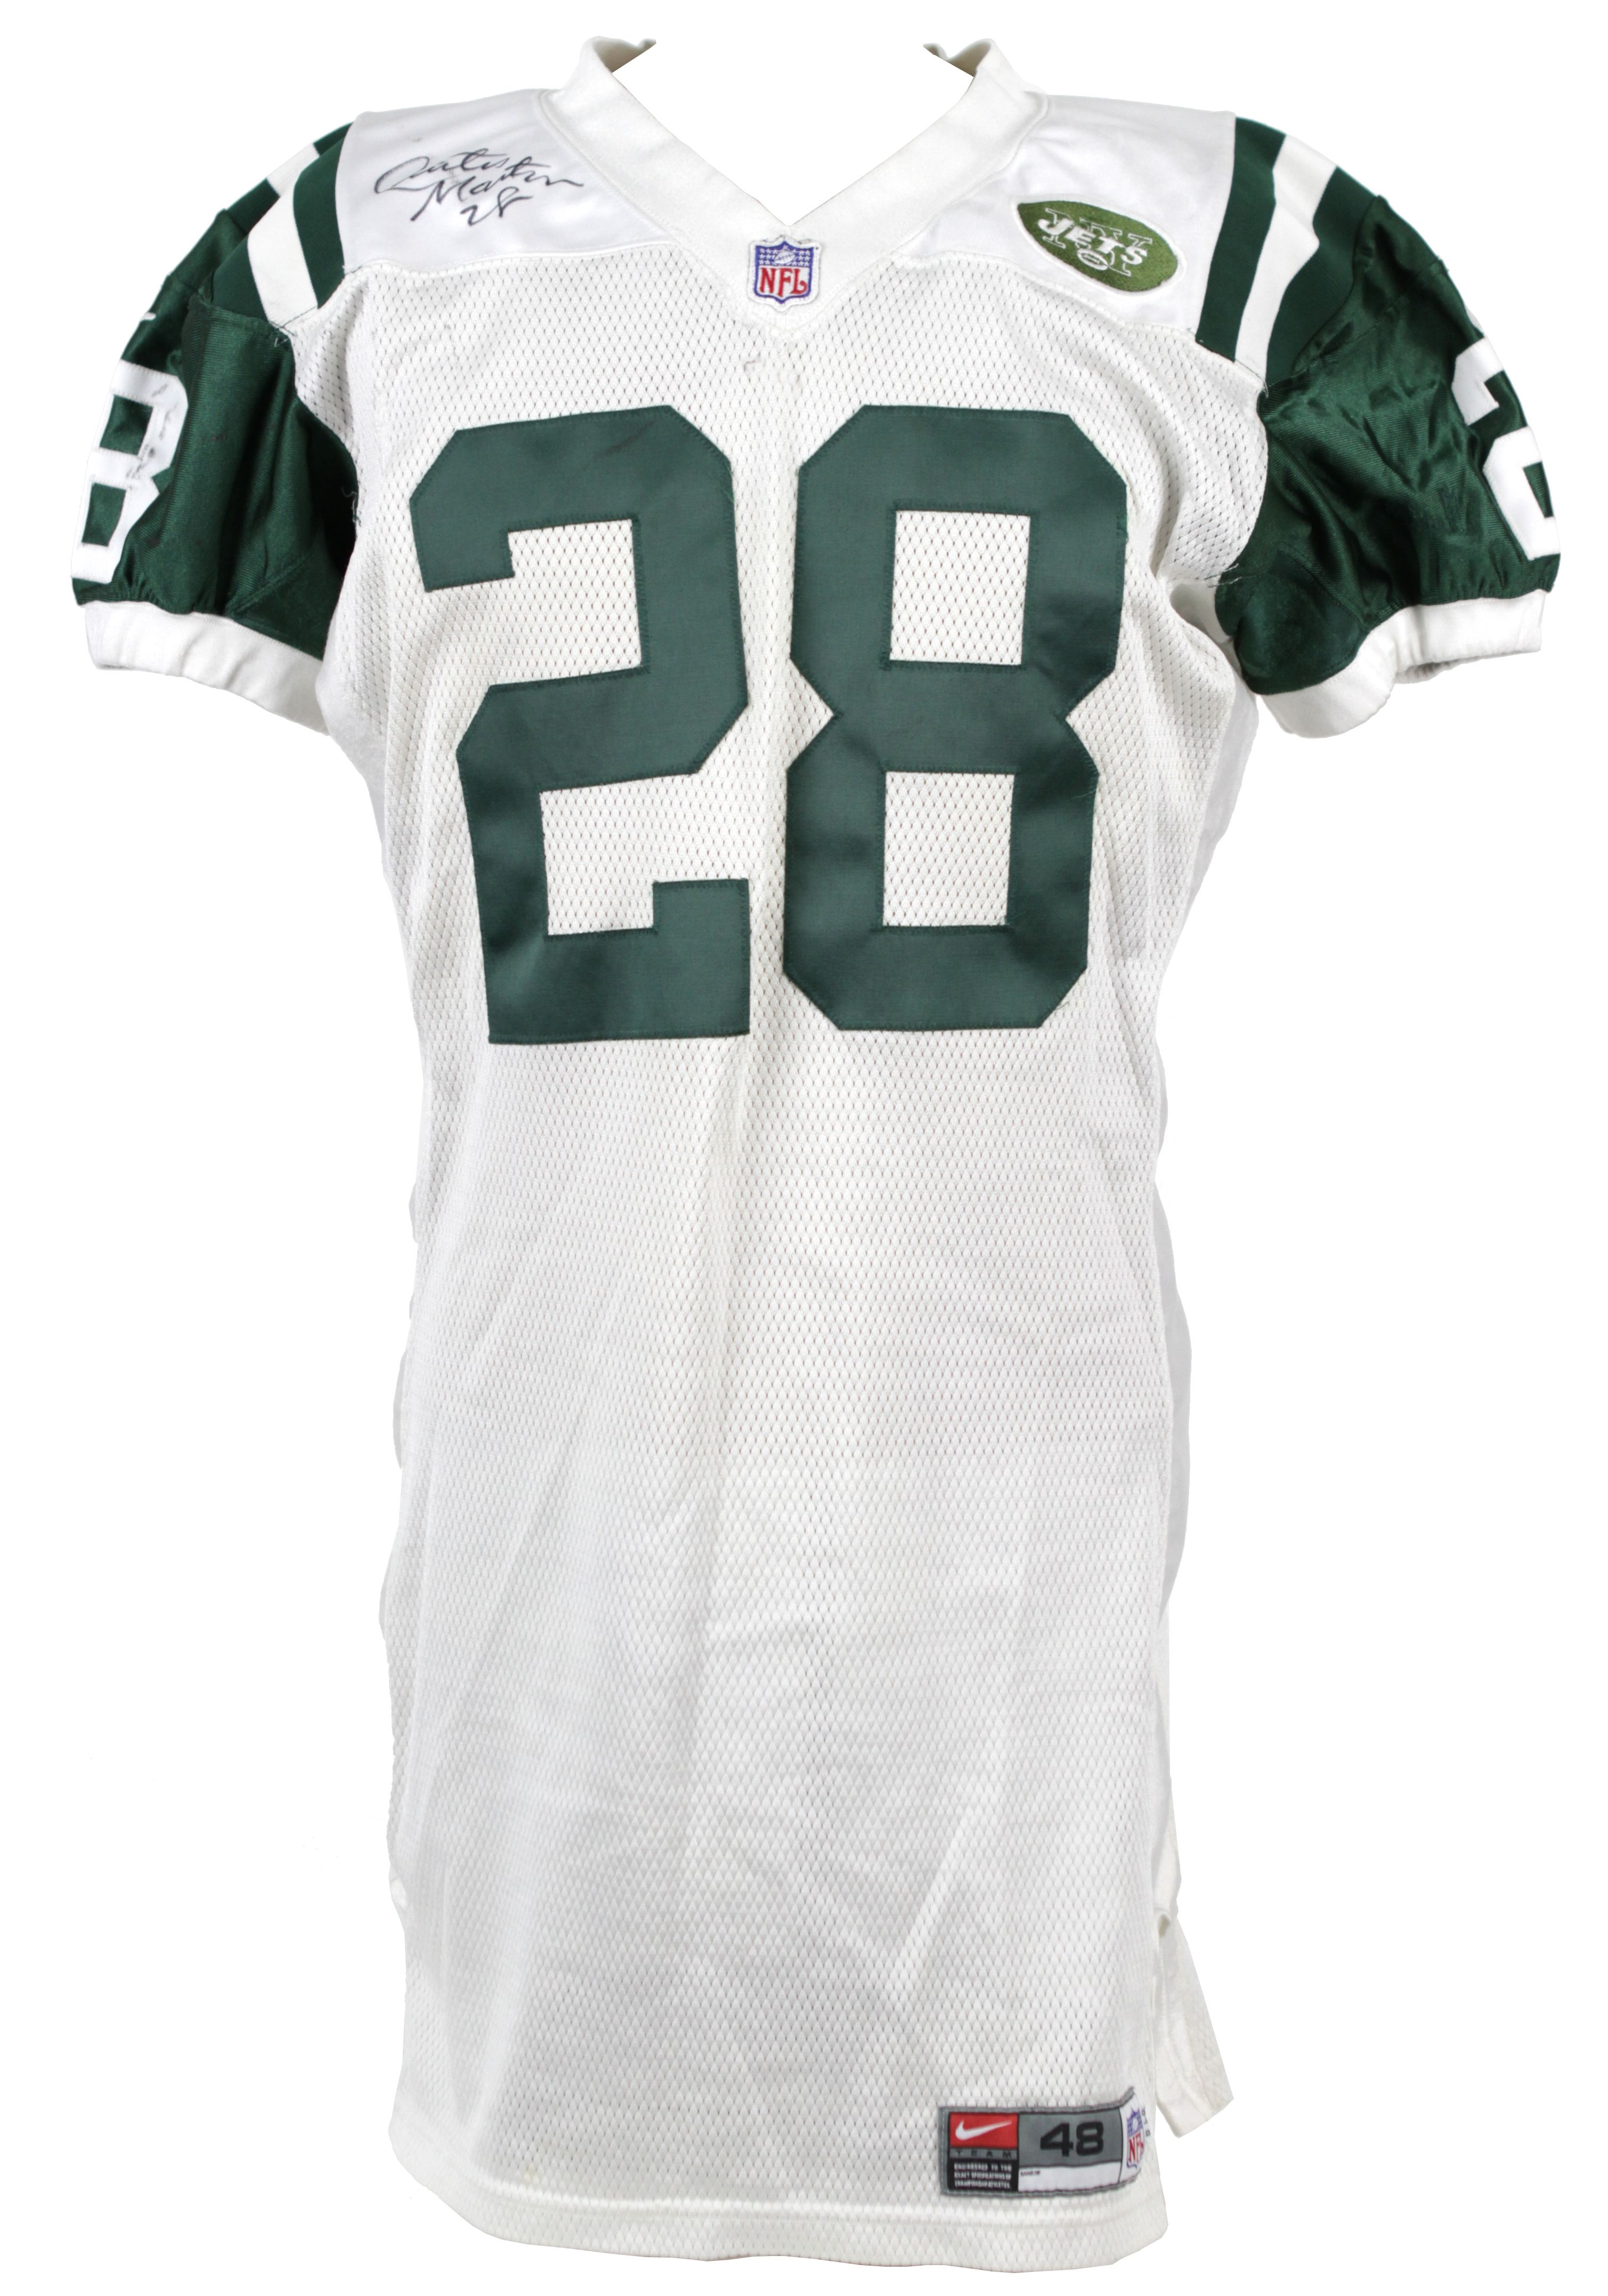 Curtis Martin Signed Jersey - White Auth Mitchell & Ness PSA